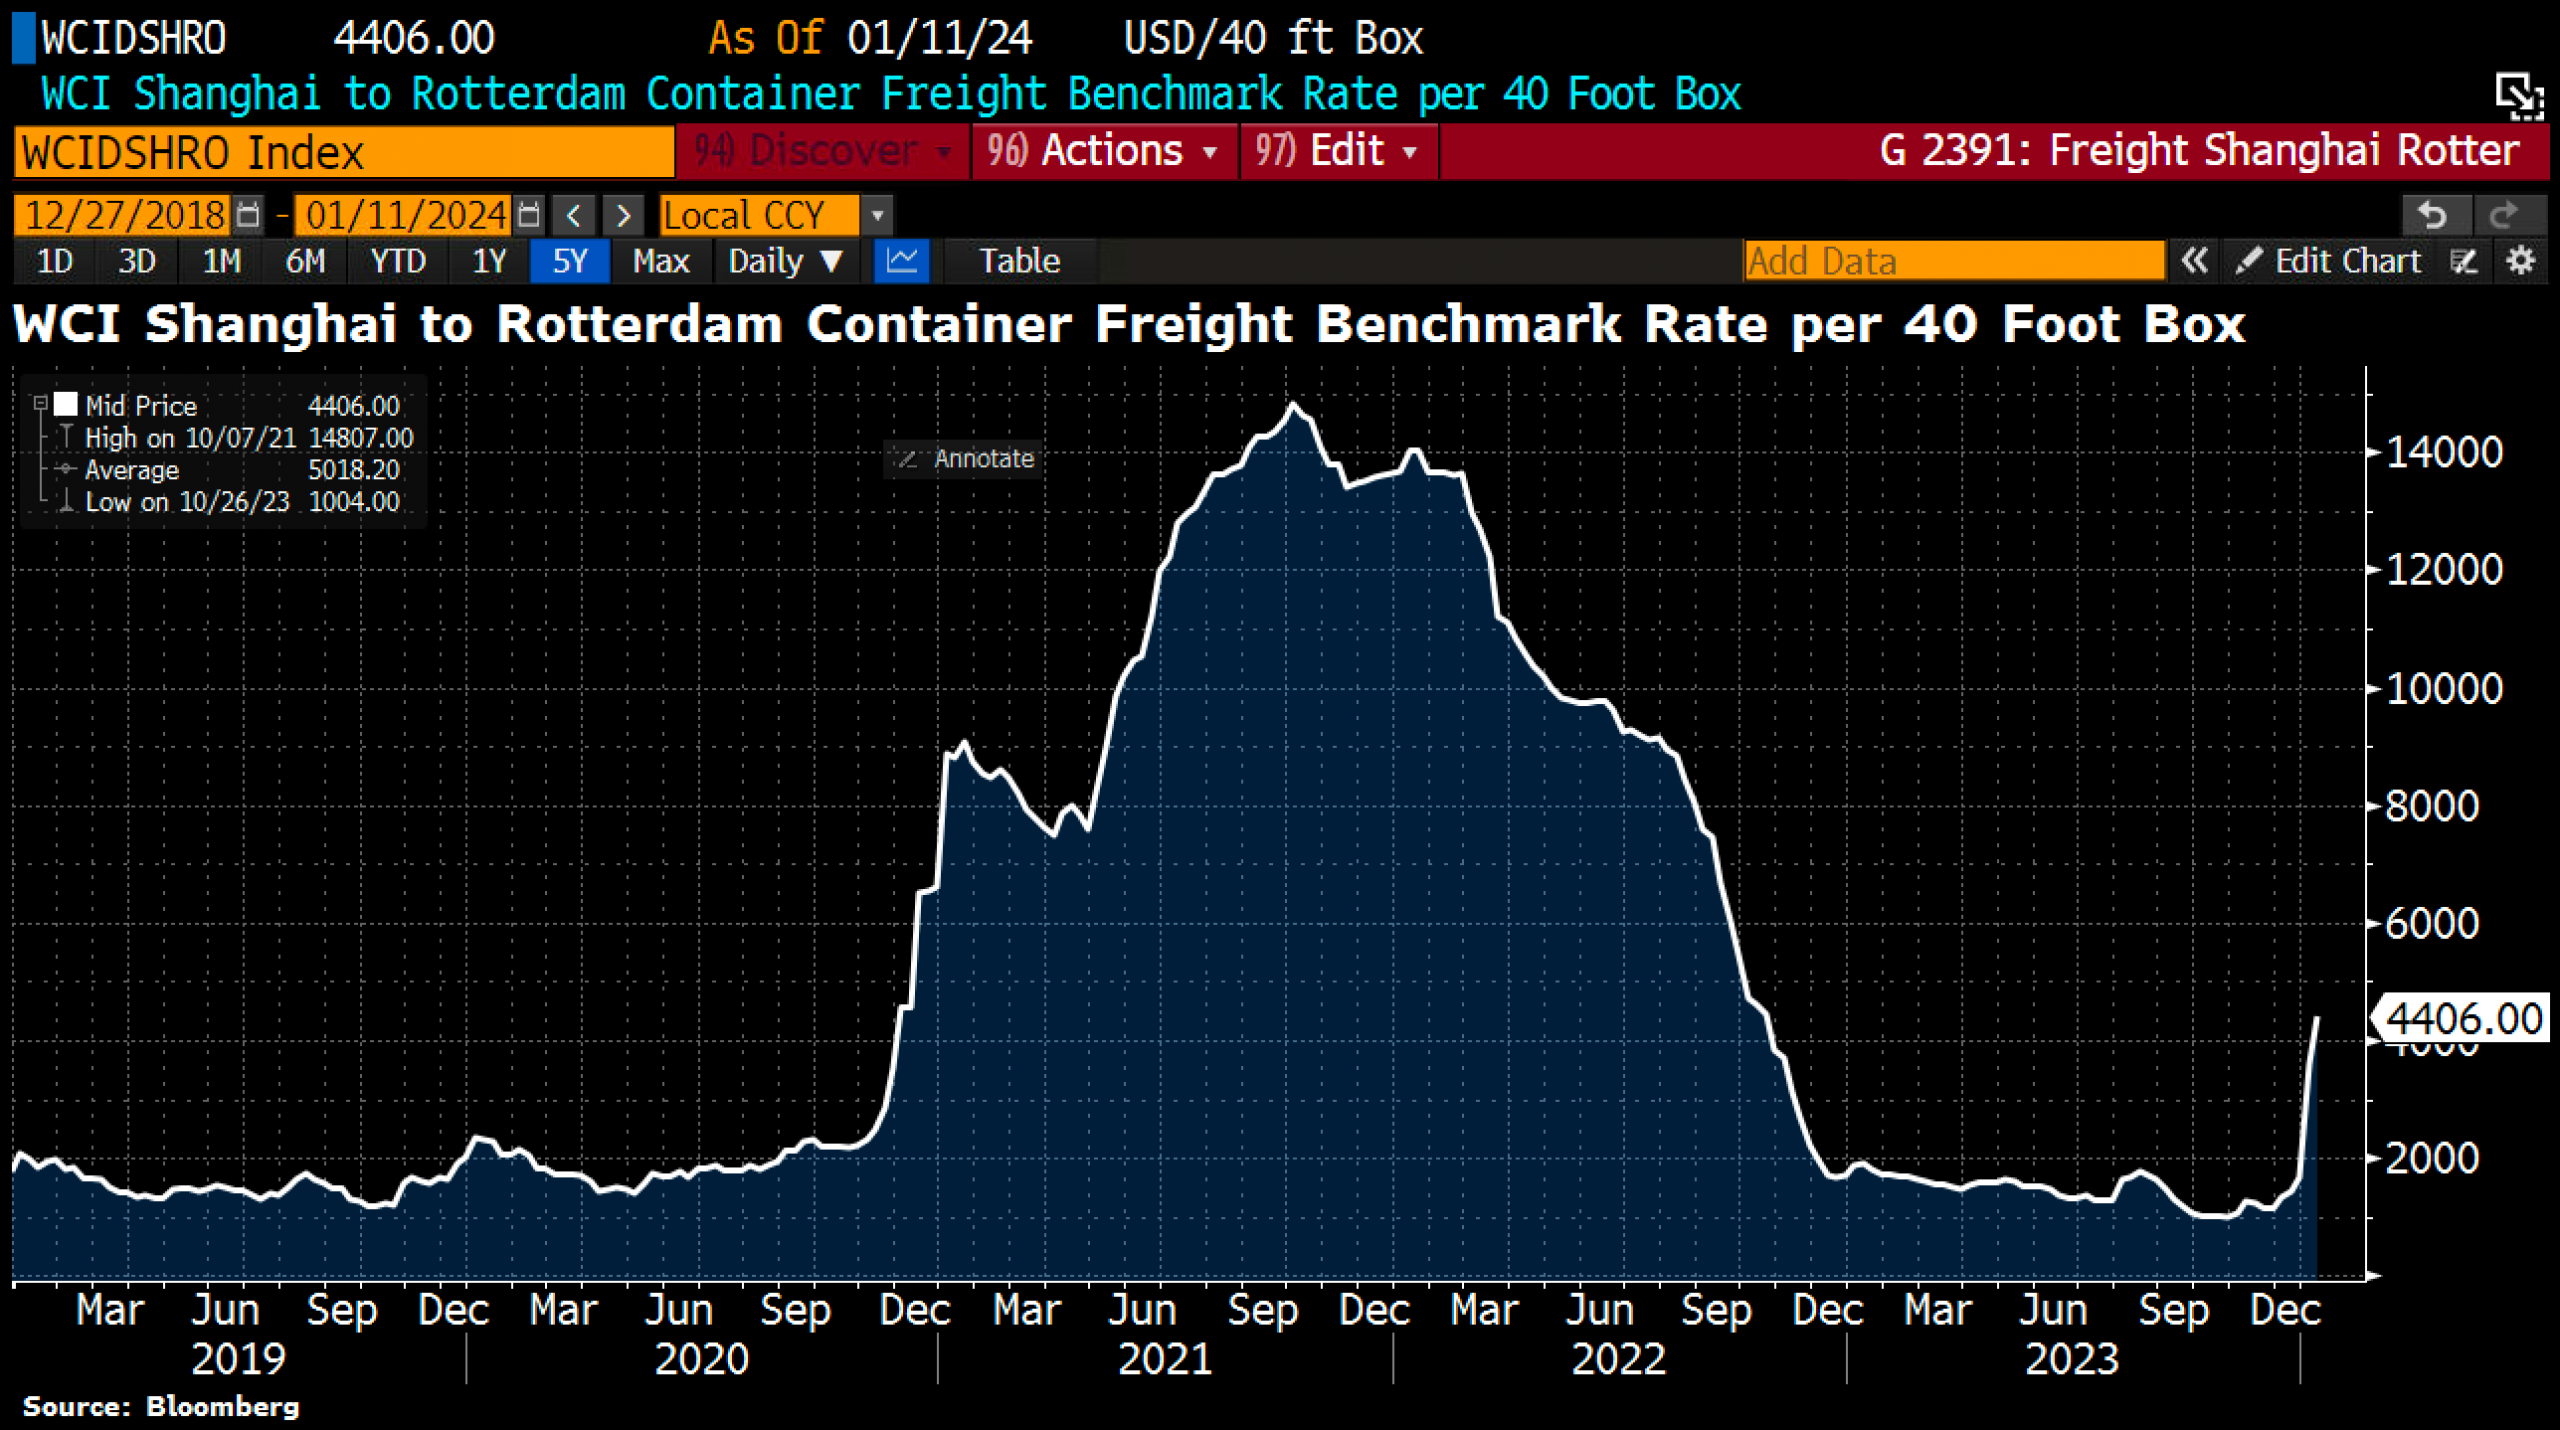 Shanghai to Rotterdam Container Freight Benchmark Rate. Source: Holger Zschäpitz